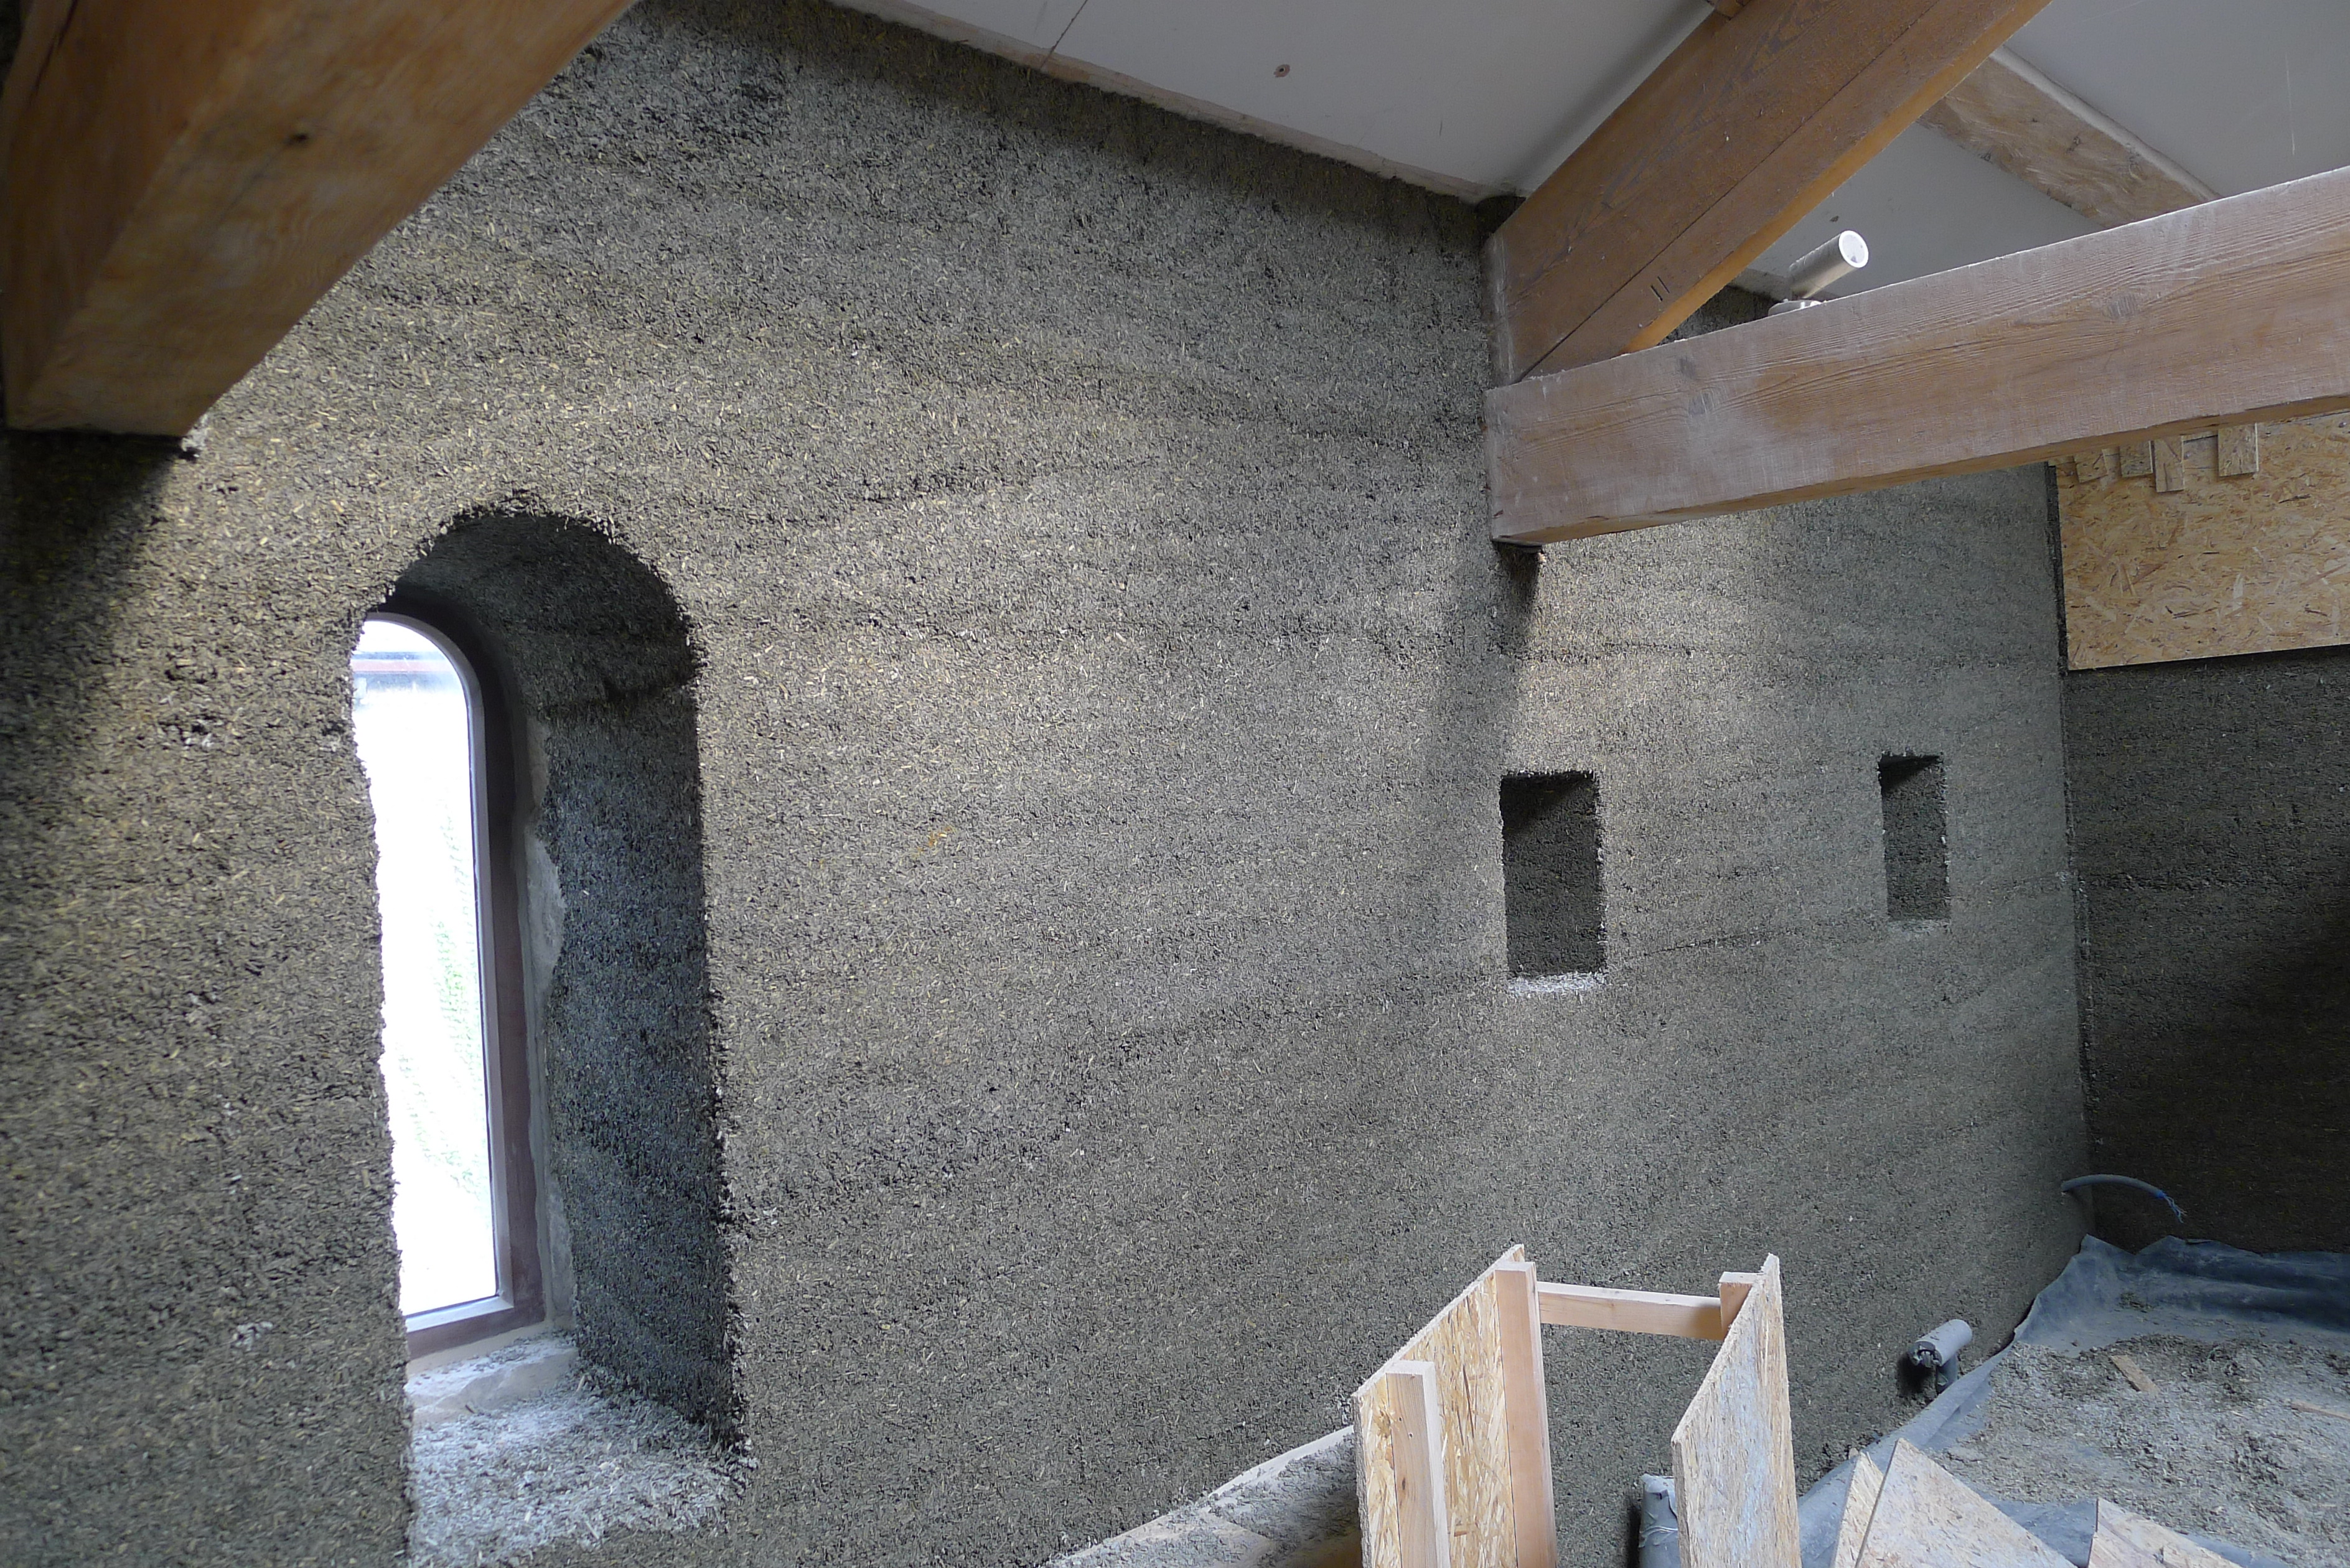 hempcrete internal solid wall insulation to solid stone walls with timber framing